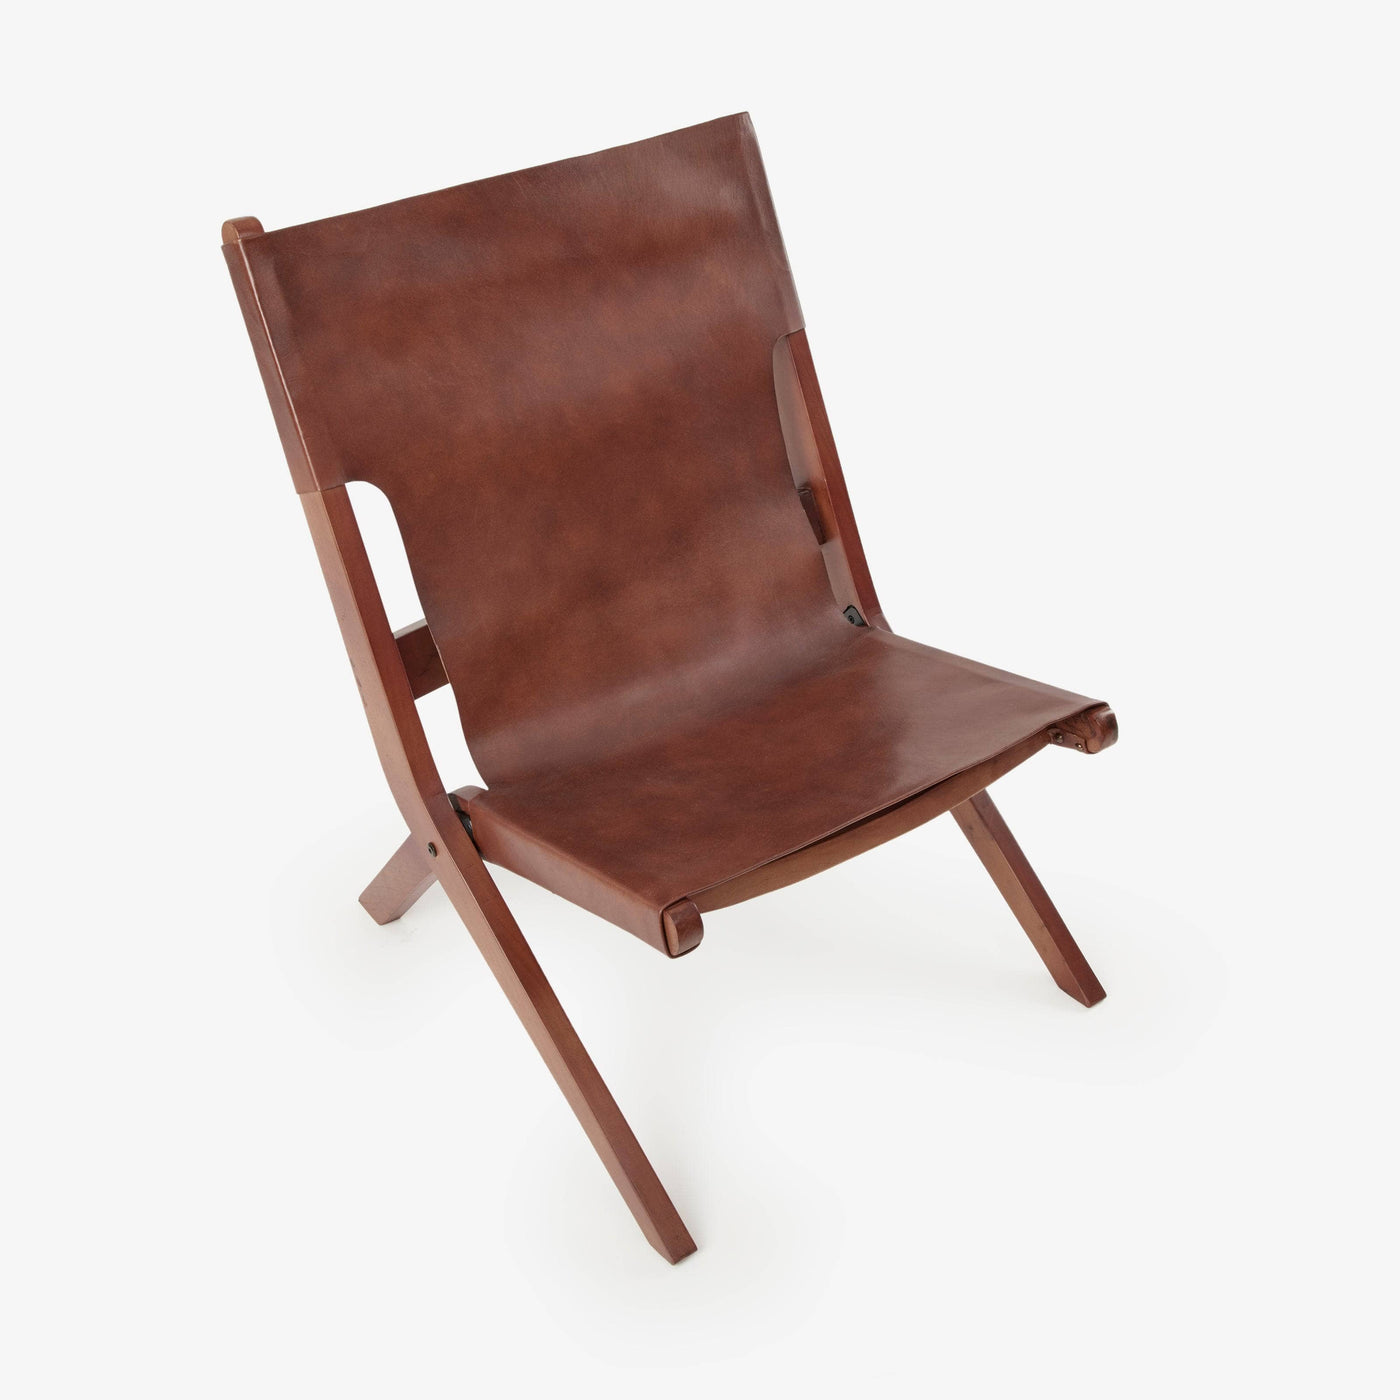 Arusha Leather Accent Chair, Tan Armchairs sazy.com